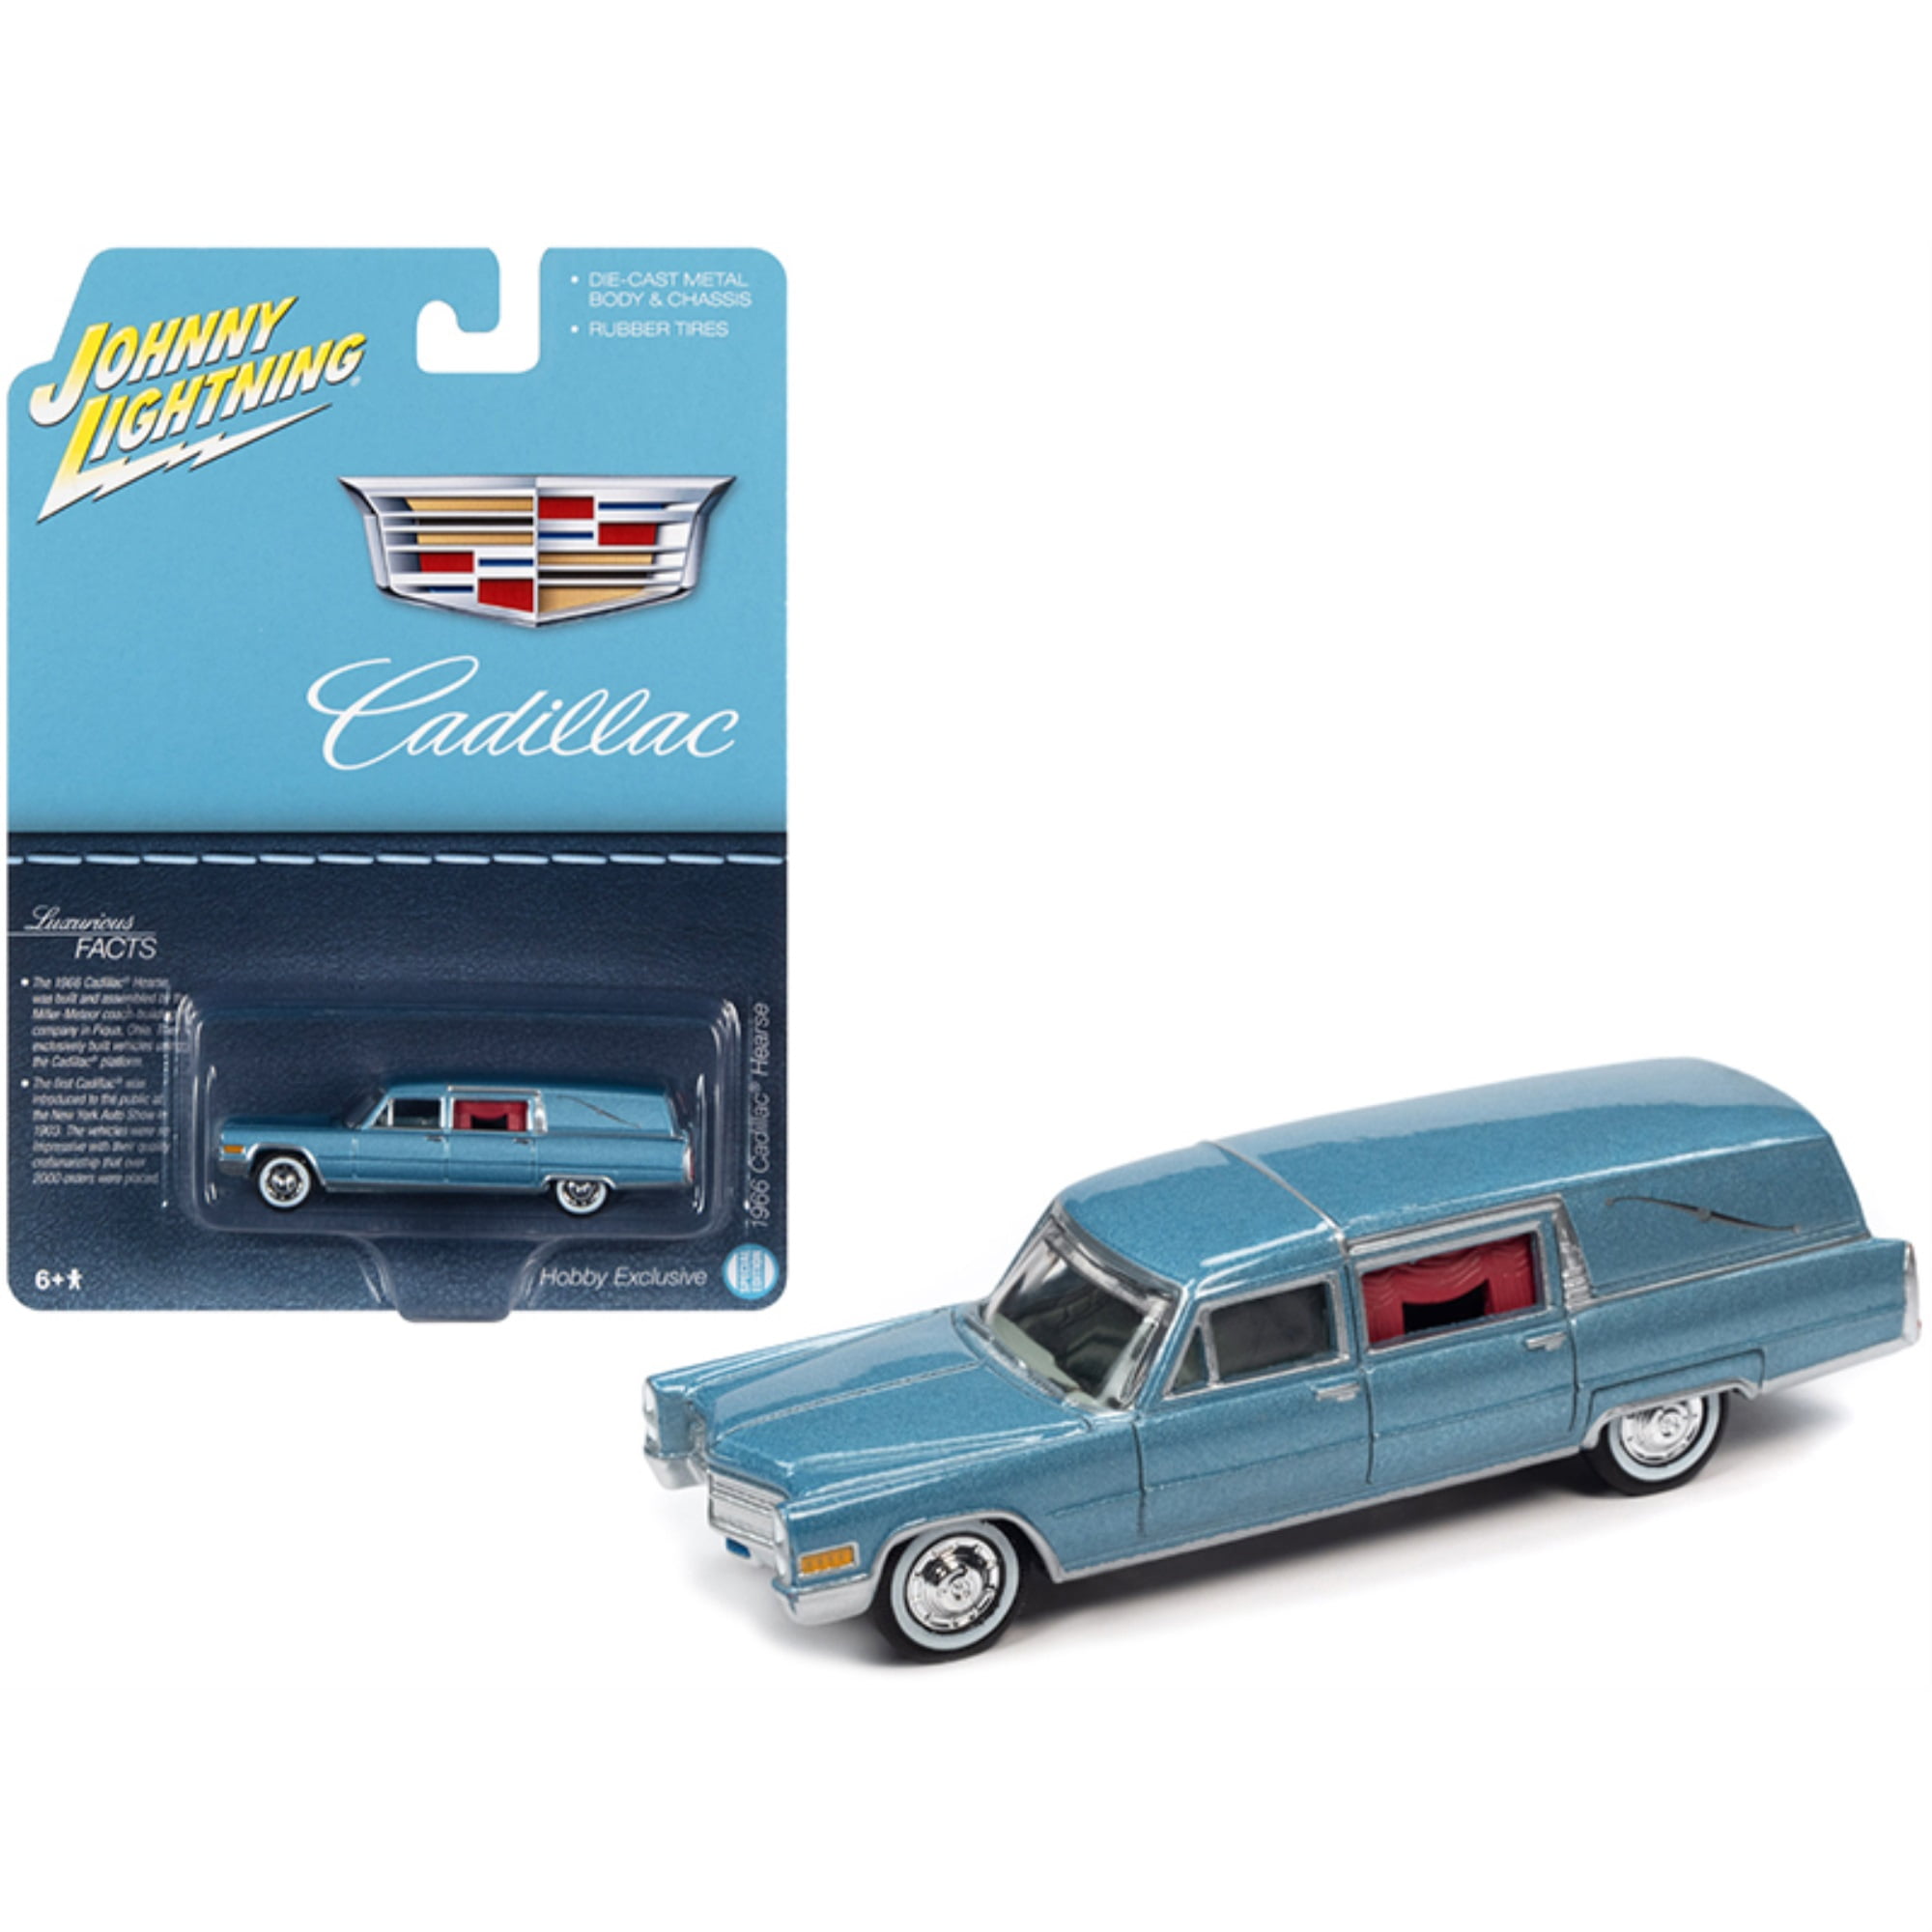 Johnny Lightning Cadillac Hearse Gold with ivory 1966 JLSP090 1/64 